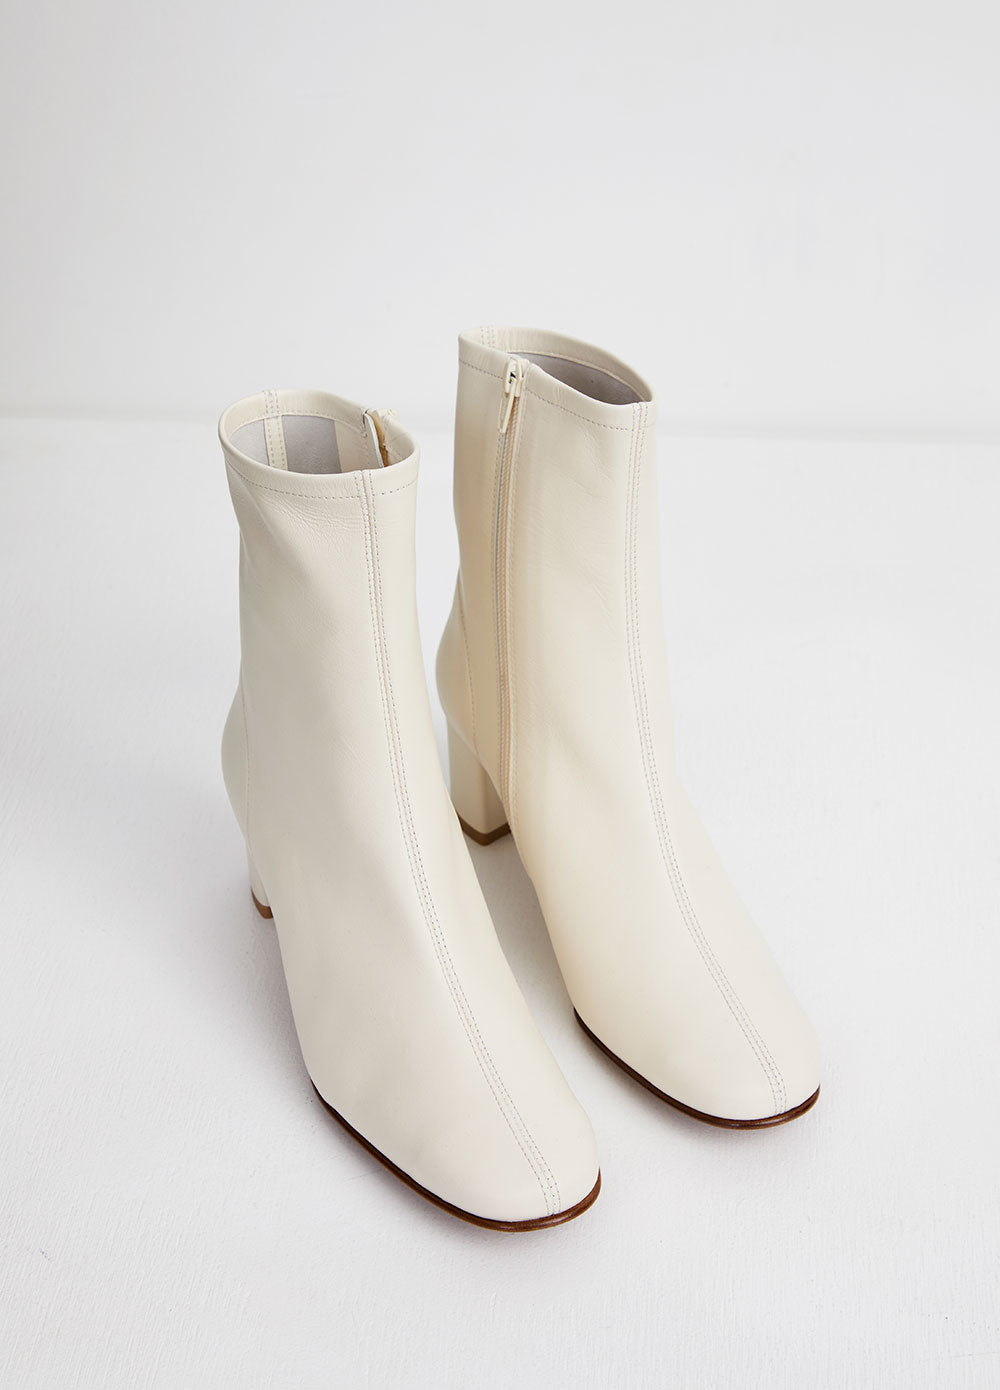 Women's White Sofia Boots by By Far | Incu